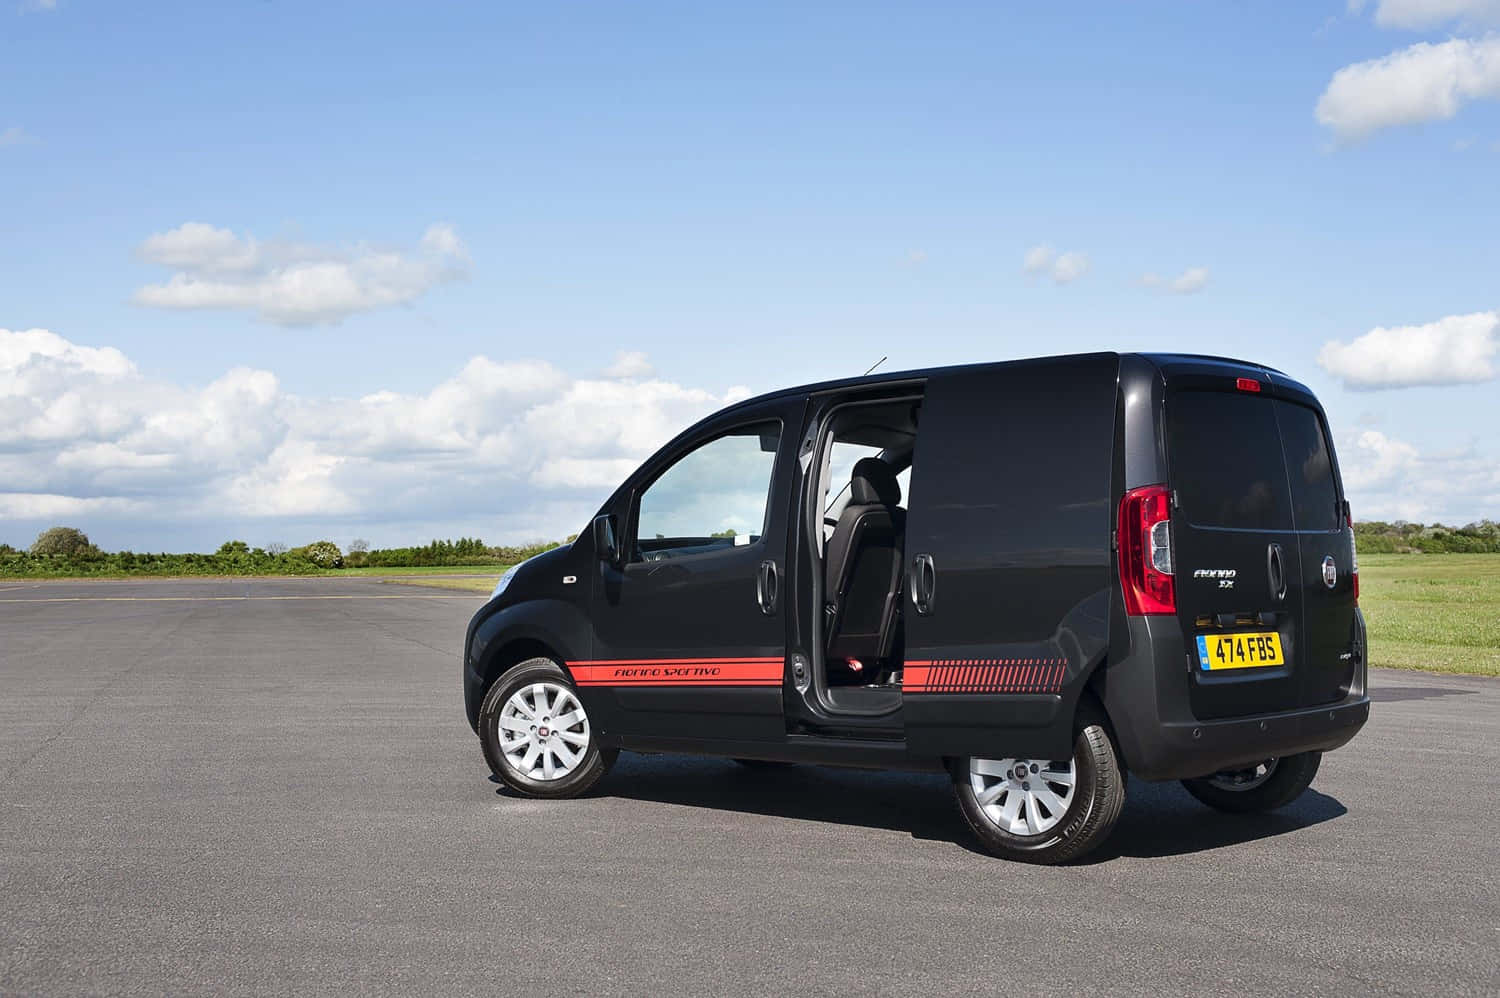 Fiat Fiorino showcasing performance and reliability in a stunning landscape Wallpaper